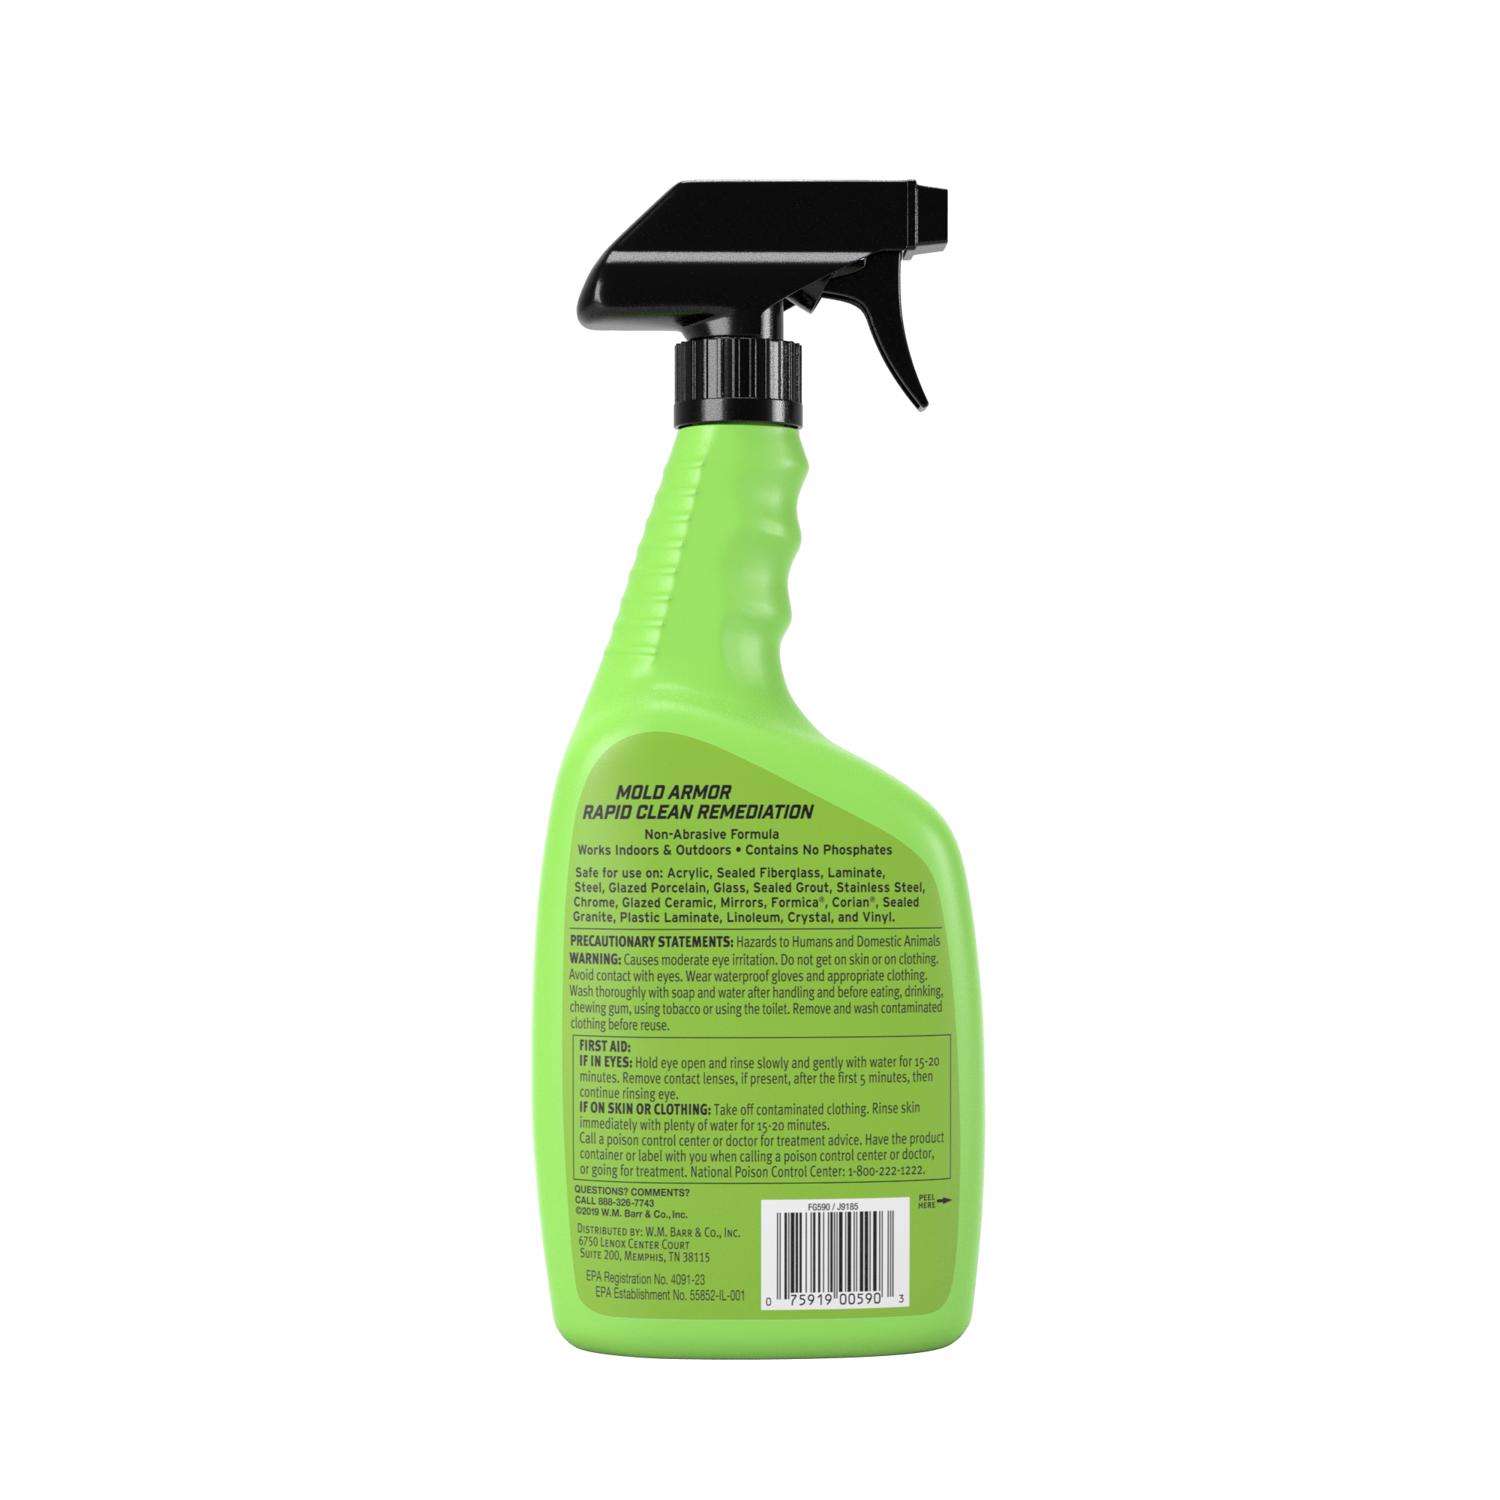 Buy Mold Armor Rapid Clean Remediation Mold & Mildew Cleaner 32 Oz.